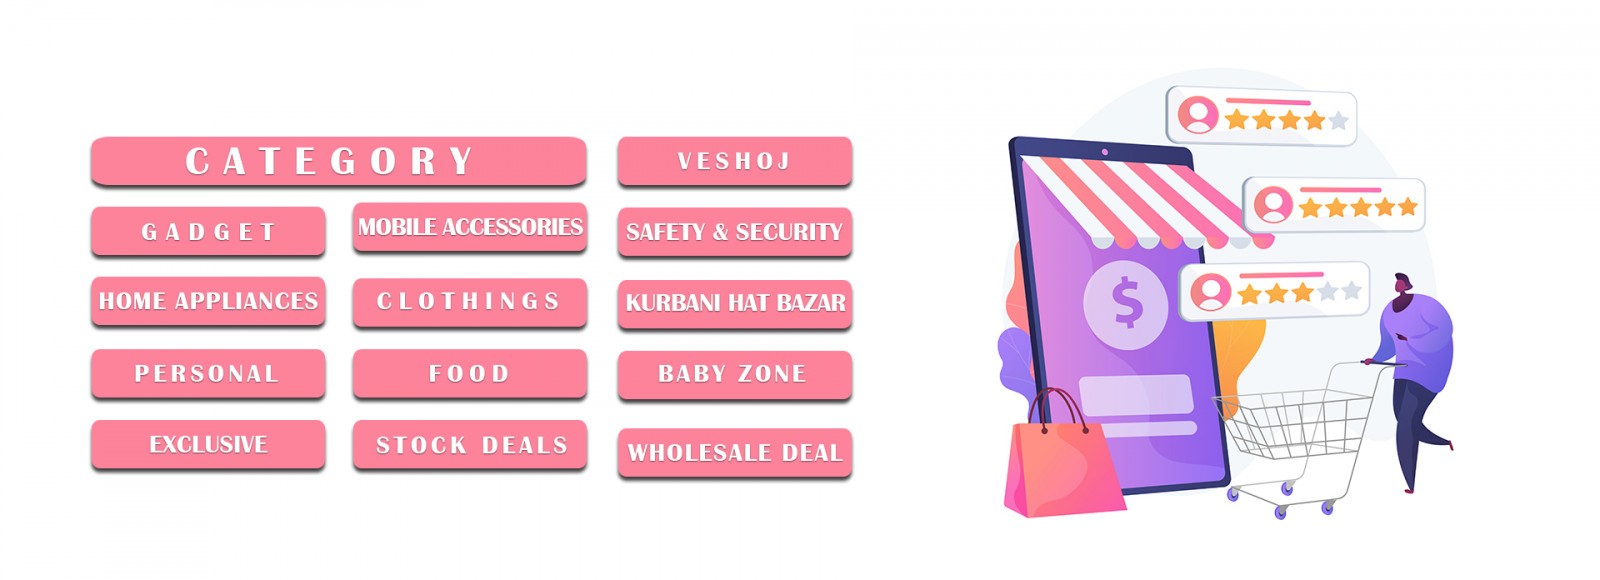 Mobile & Mobile accessories | Category | B Bazar | A Big Online Market Place and Reseller Platform in Bangladesh